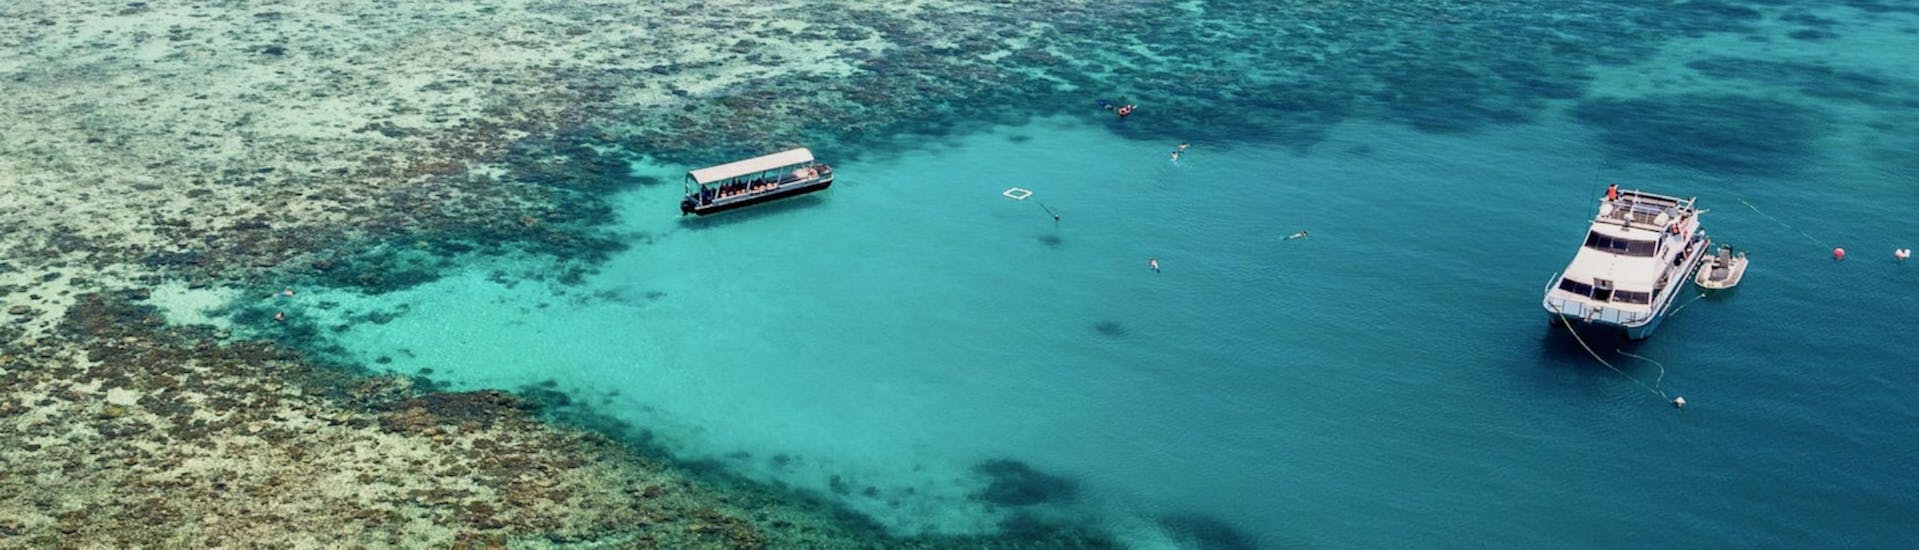 The Ocean Freedom catamaran is moored on theedge of Upolu Reef, where guests can go snorkeling during the Great Barrier Reef Cruise from Cairns.